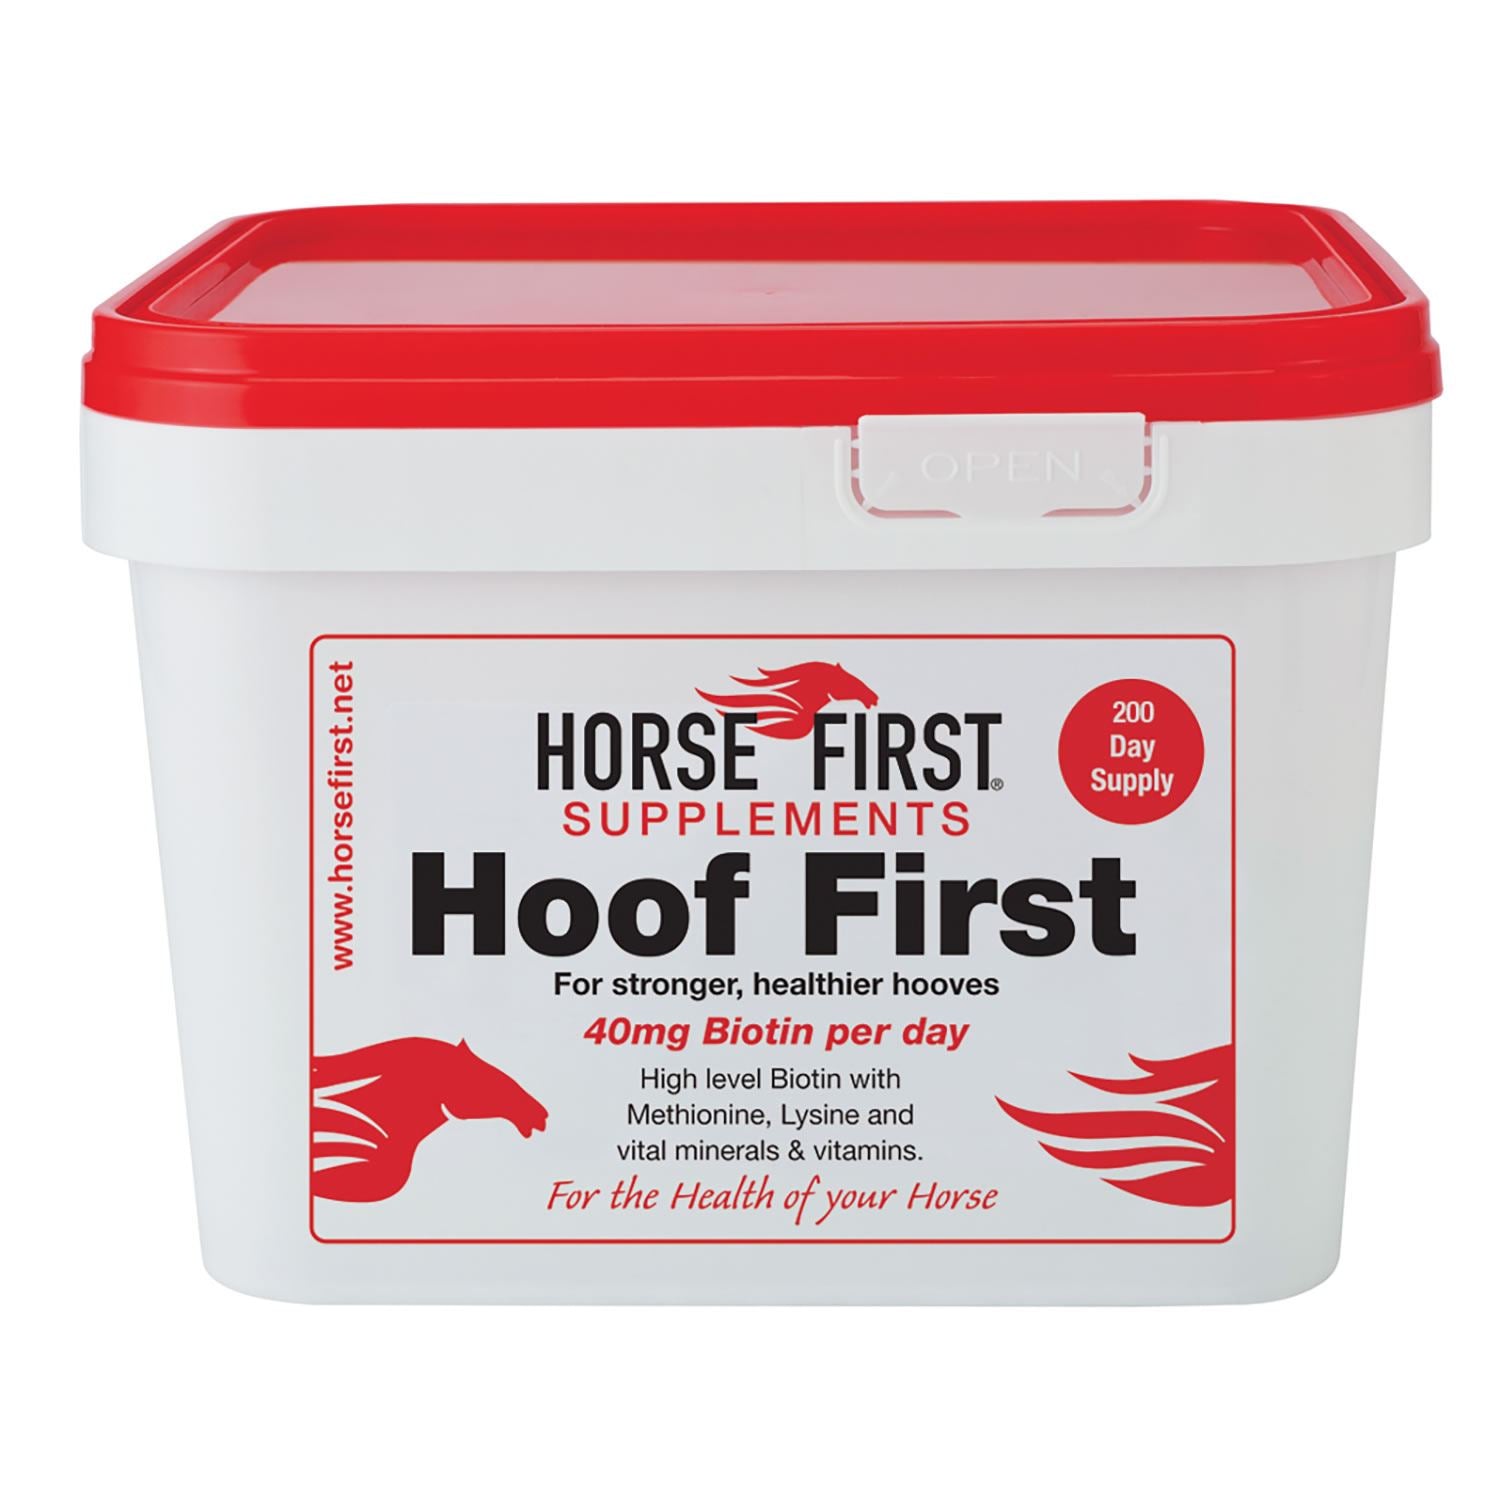 HORSE FIRST HOOF FIRST, for stronger hooves